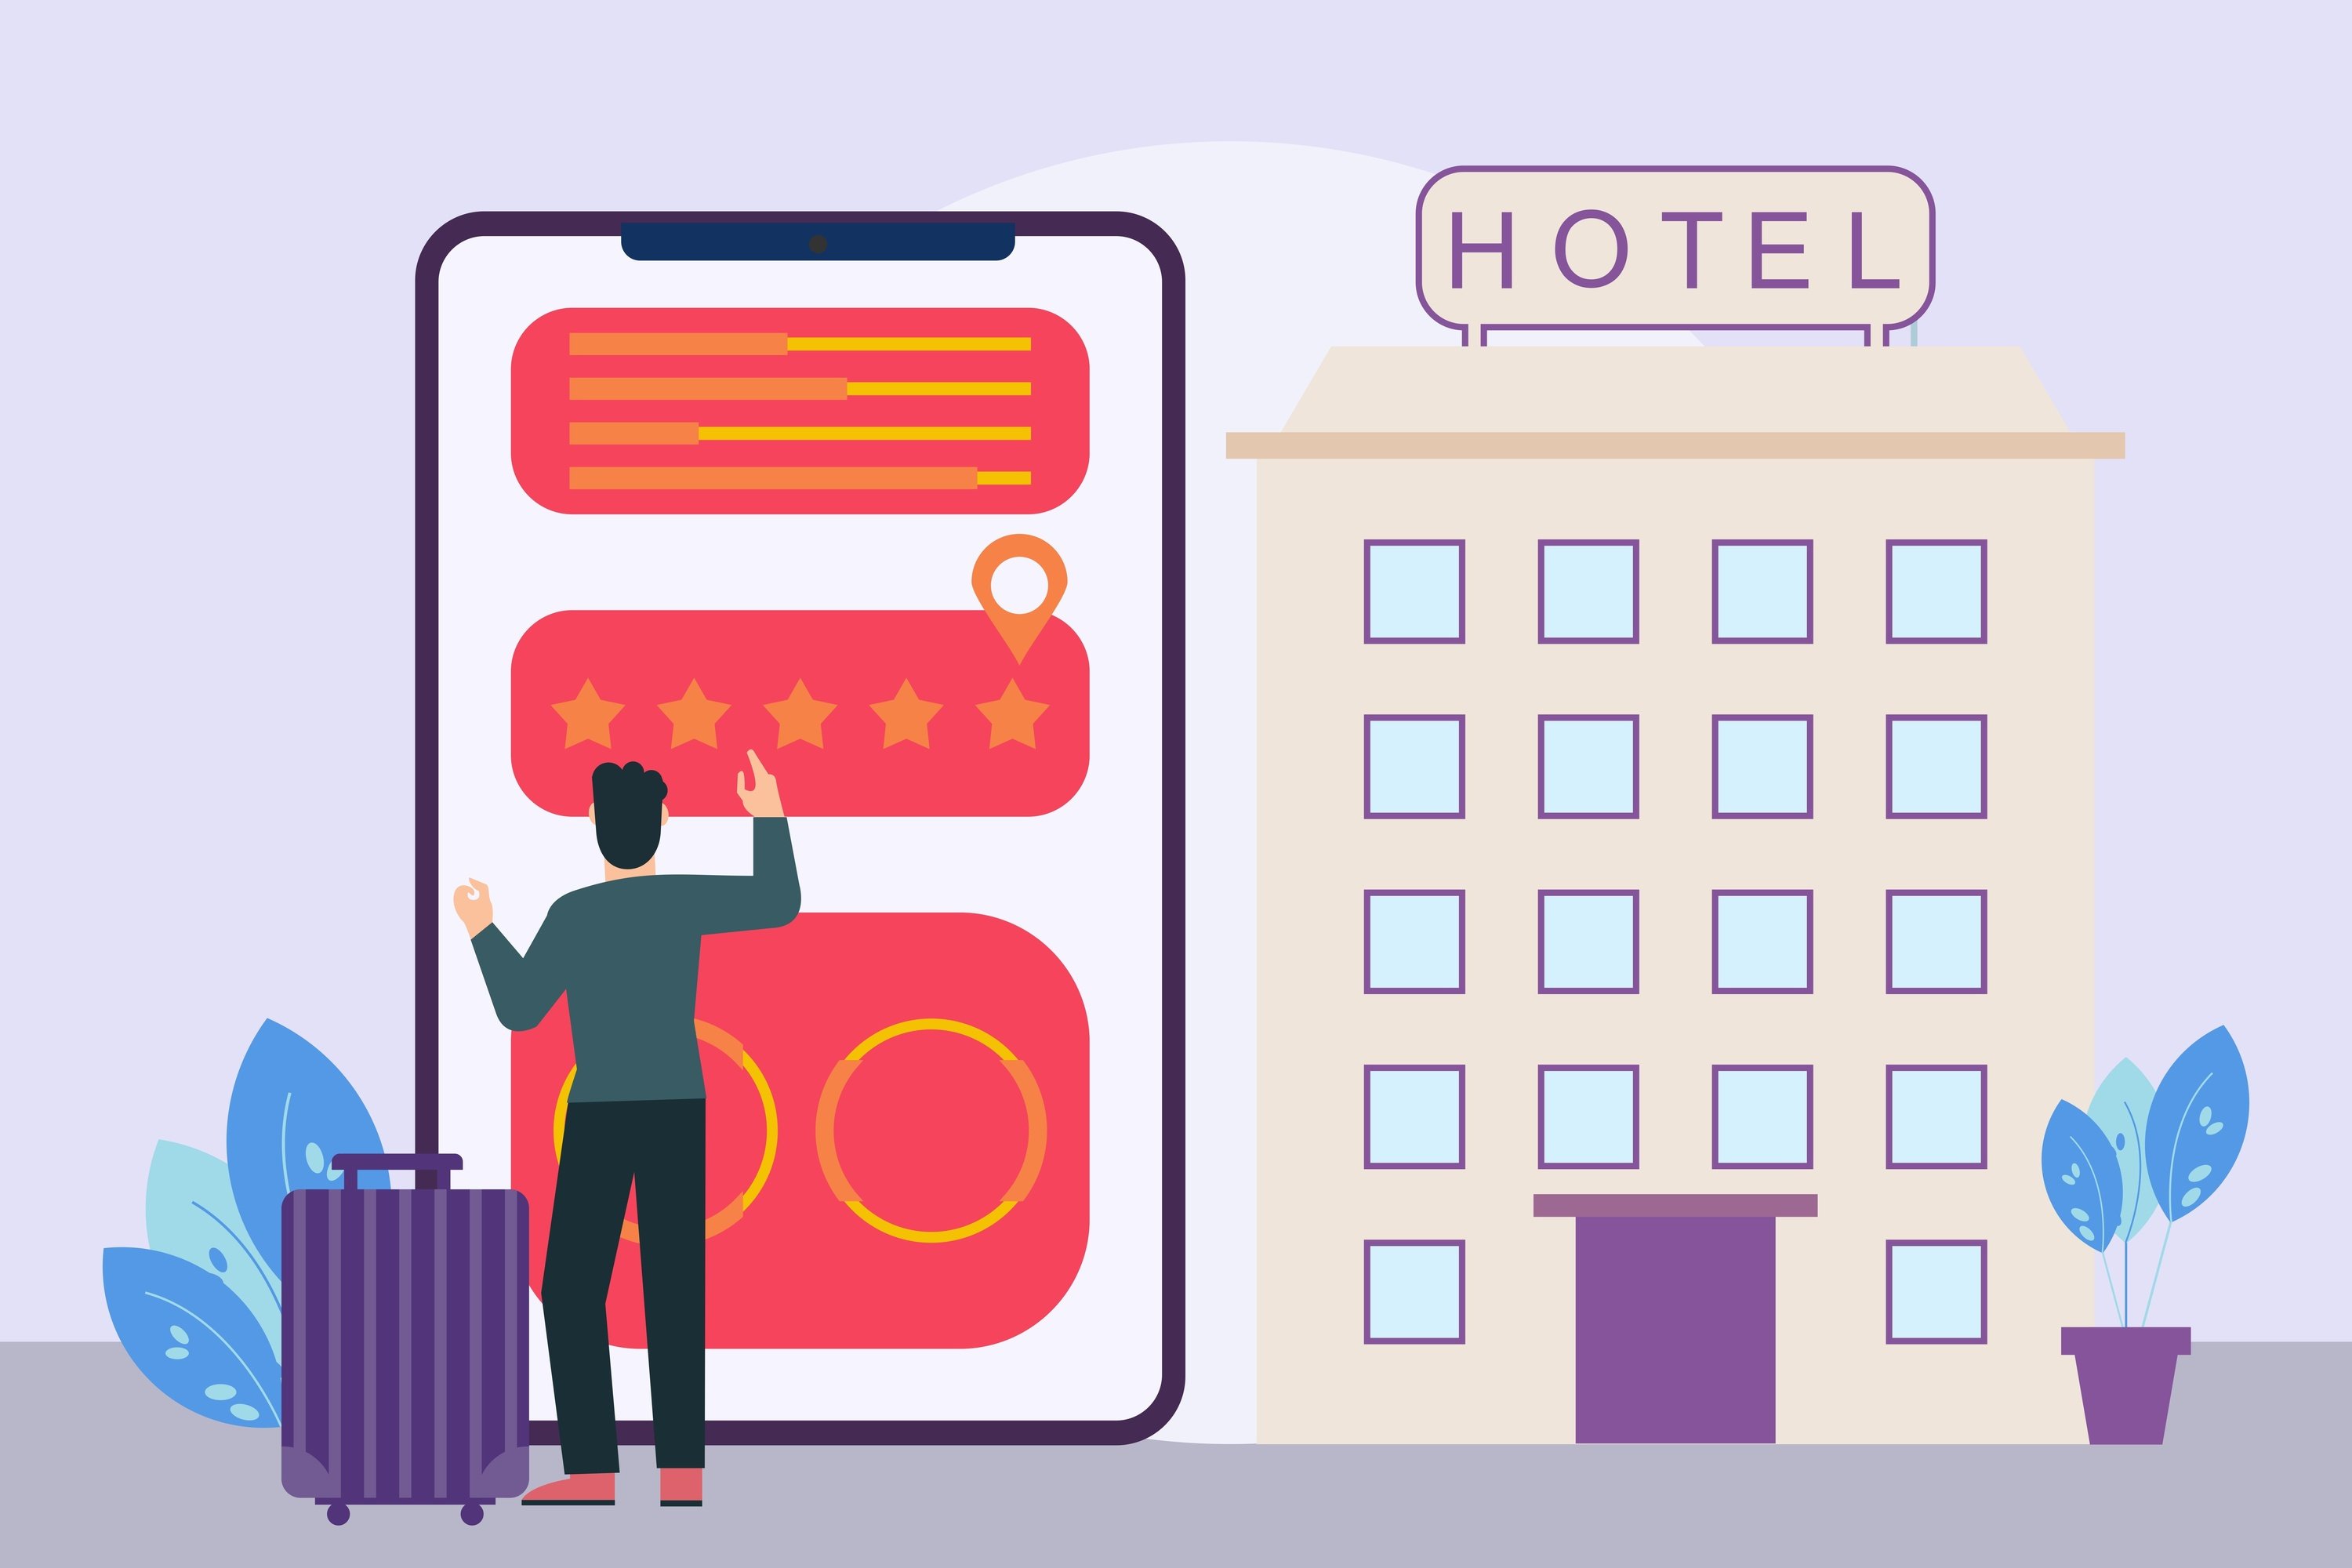 a man with a suitcase is standing in front of a hotel